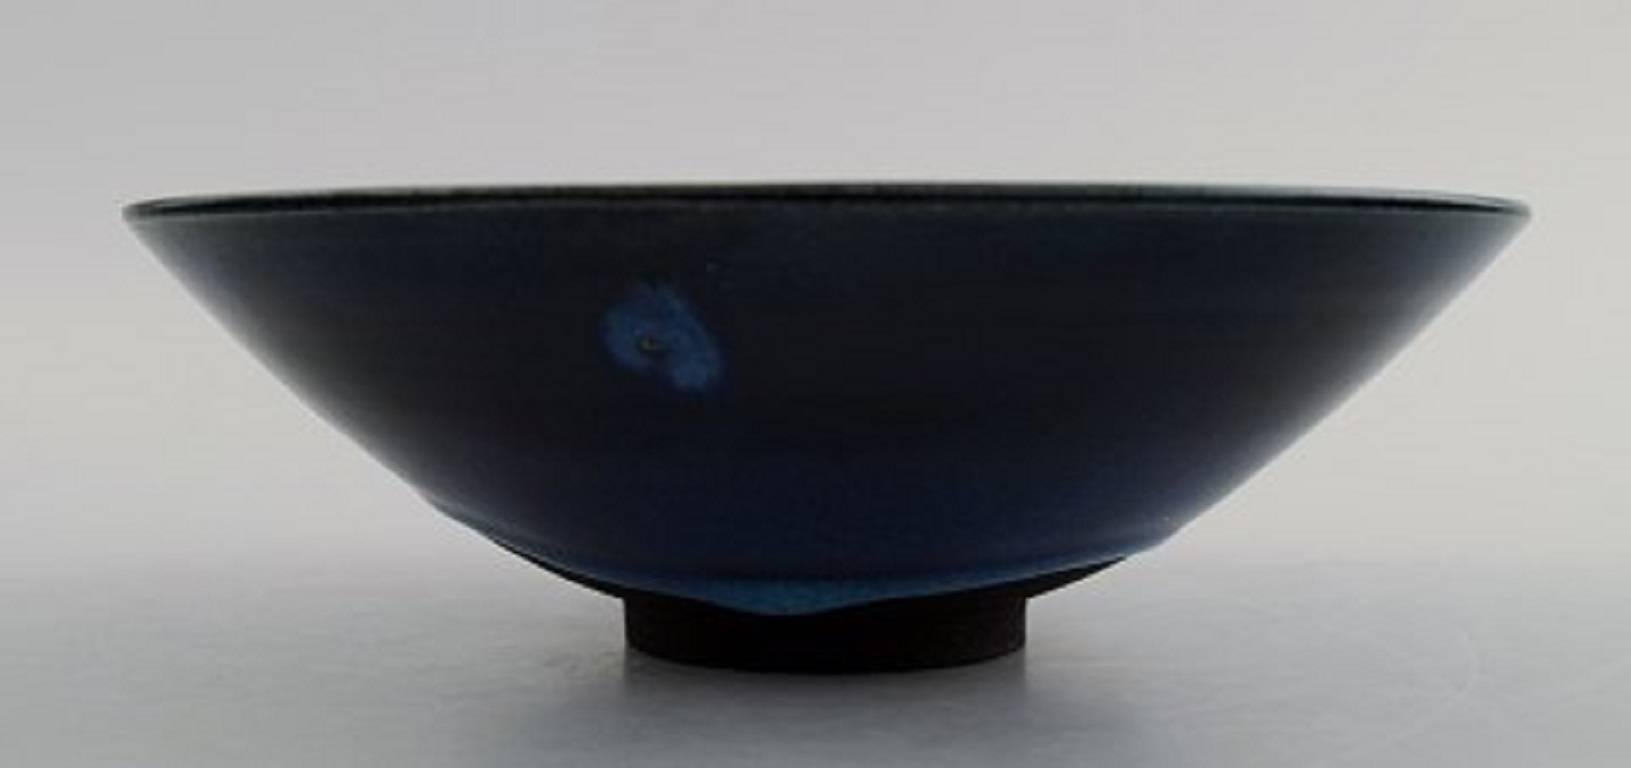 Wilhelm Kåge/Kage (1889-1960) for Gustavsberg, "Farsta".

Unique bowl in stoneware, decorated with beautiful blue glaze in many shades.

Provenance: Nils Holm's collection of modern crafts.

Stamped. Gustavsberg Kåge.

In perfect